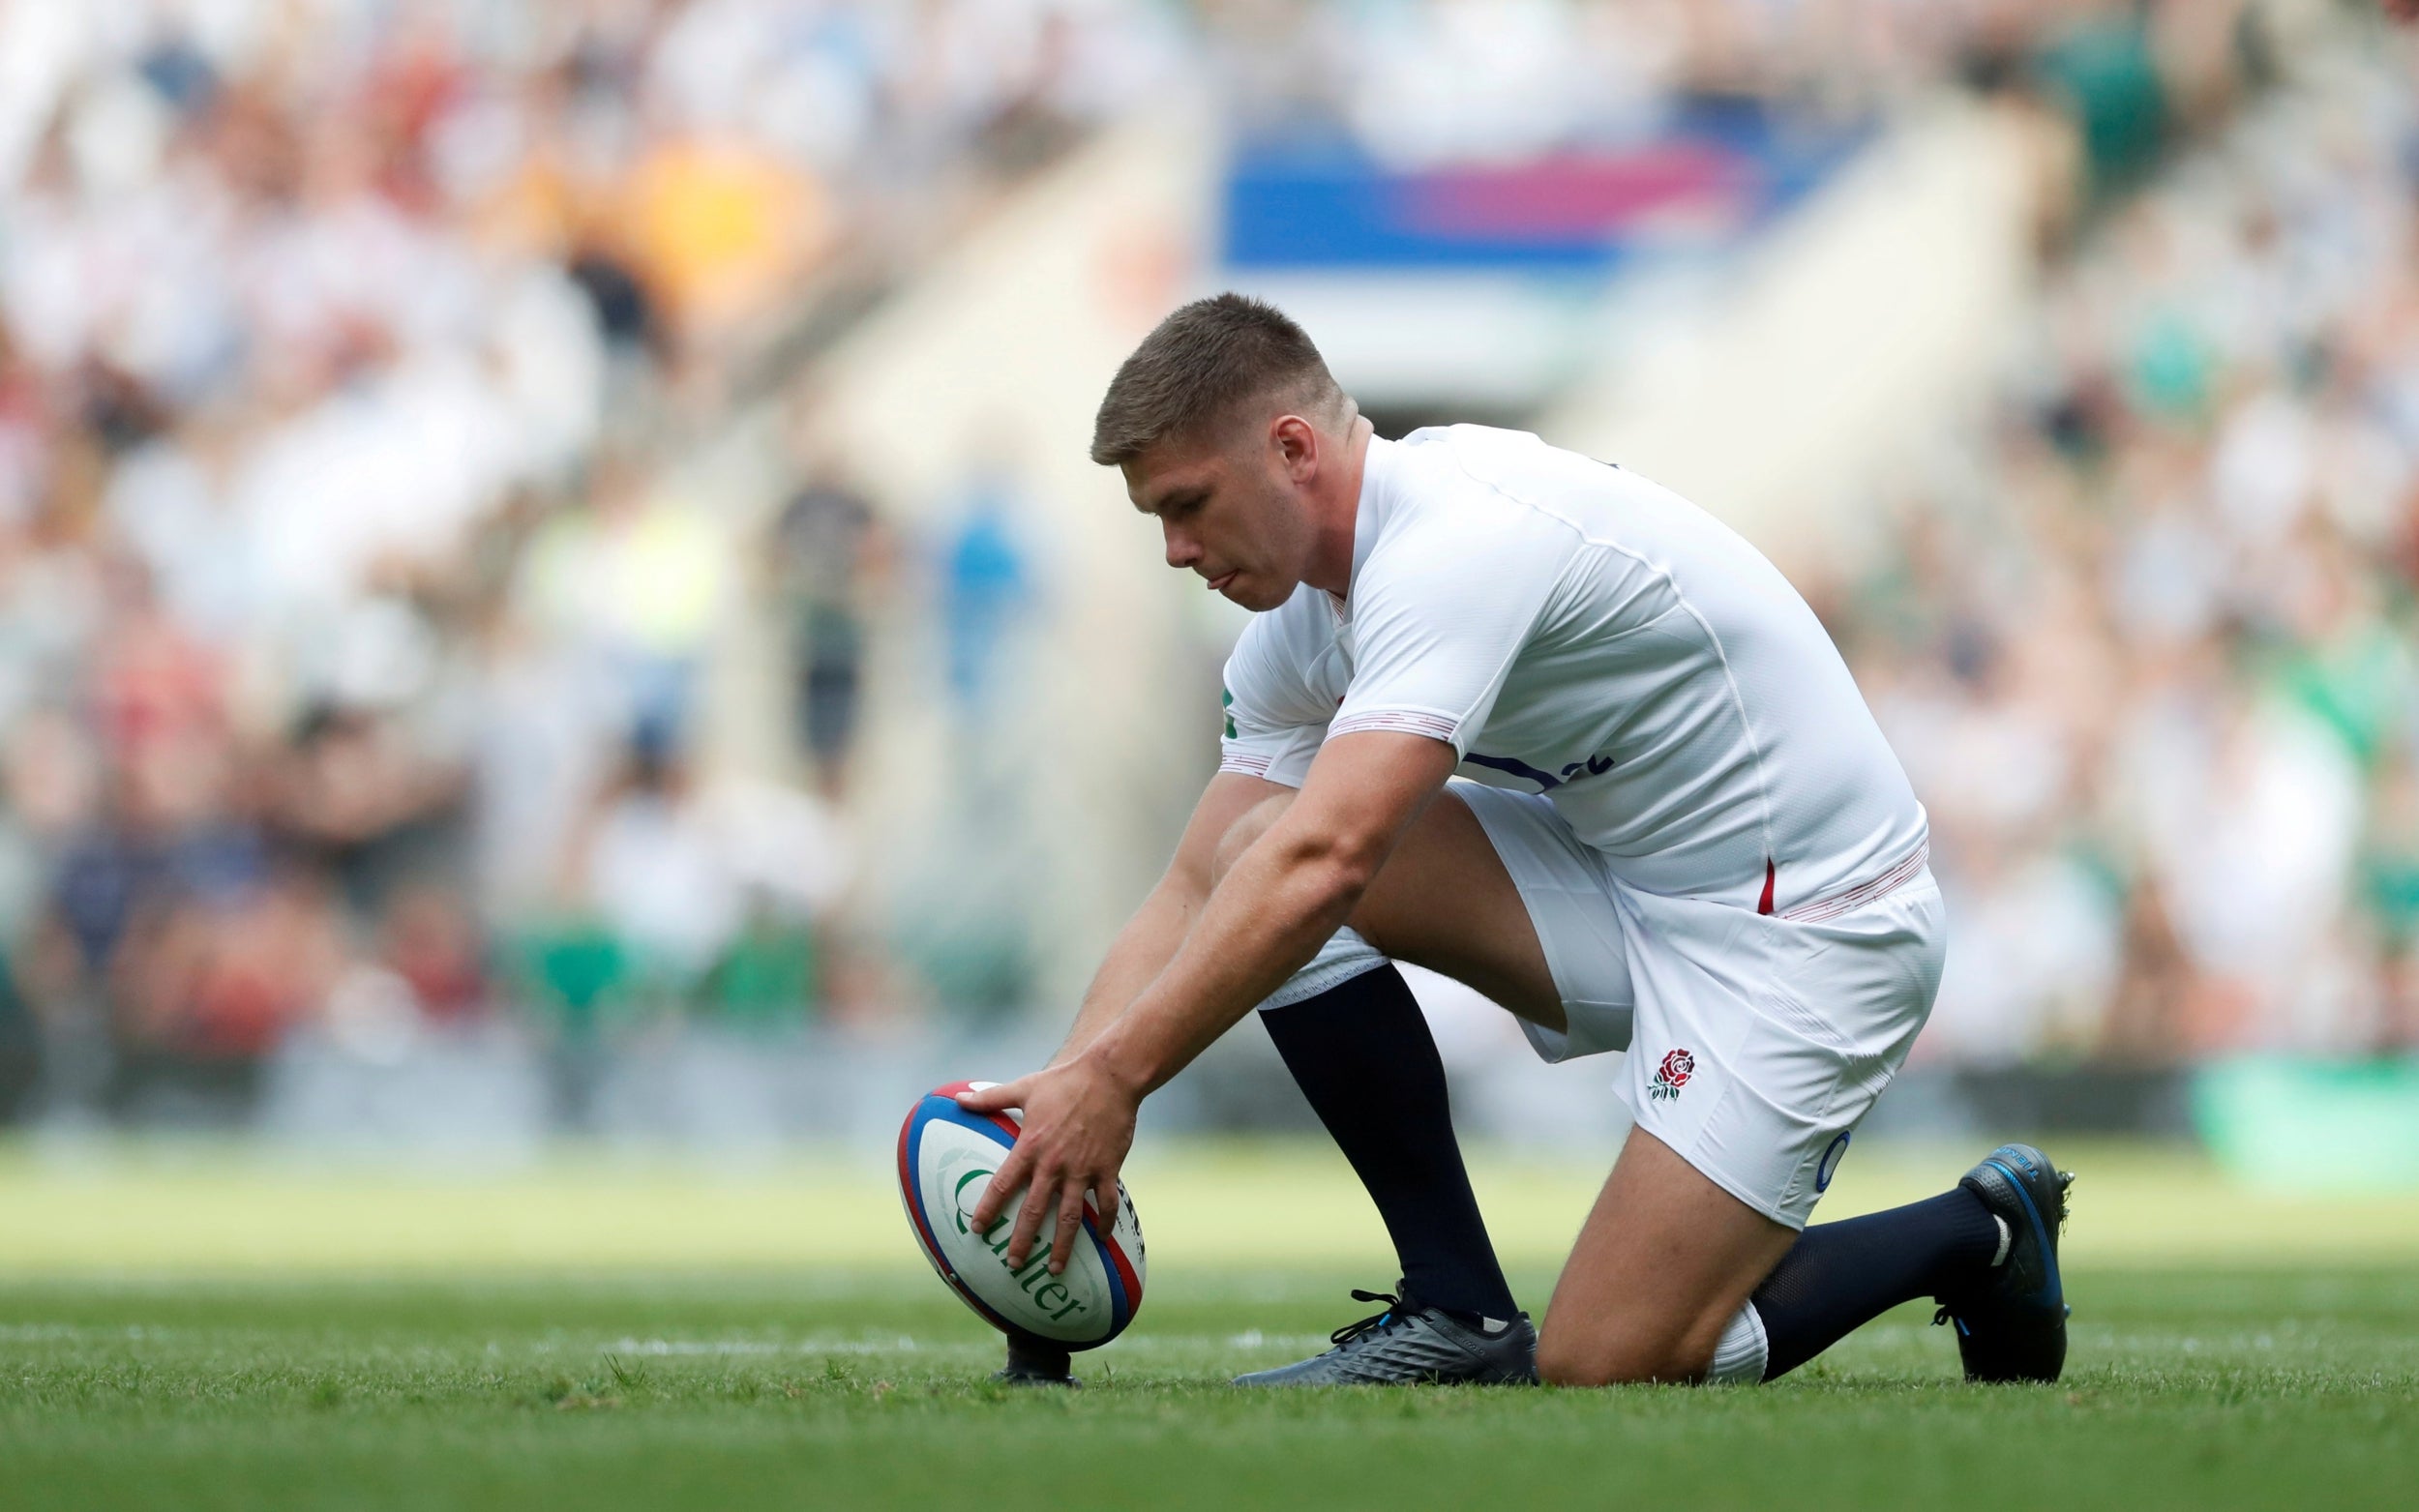 England vs Australia, Rugby World Cup 2019: What time is quarter final